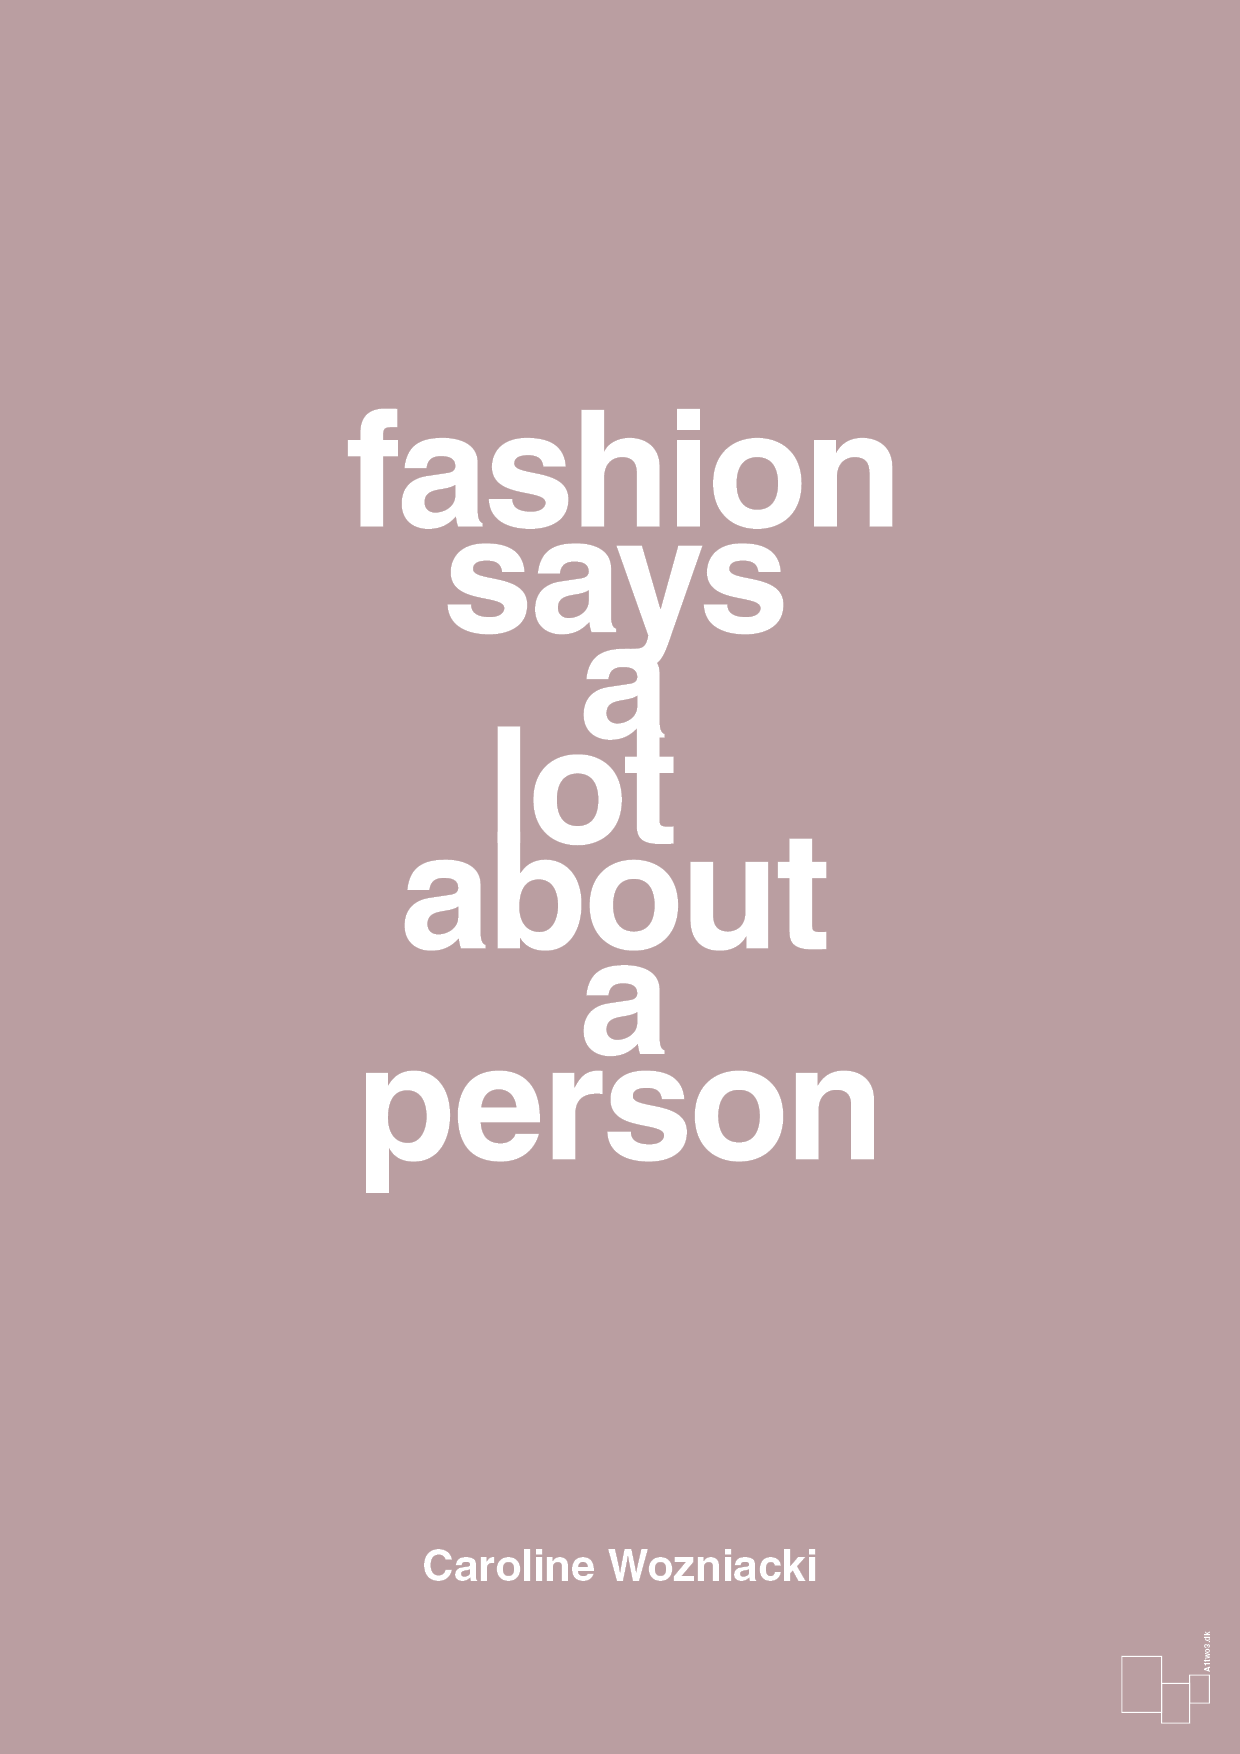 fashion says a lot about a person - Plakat med Citater i Light Rose